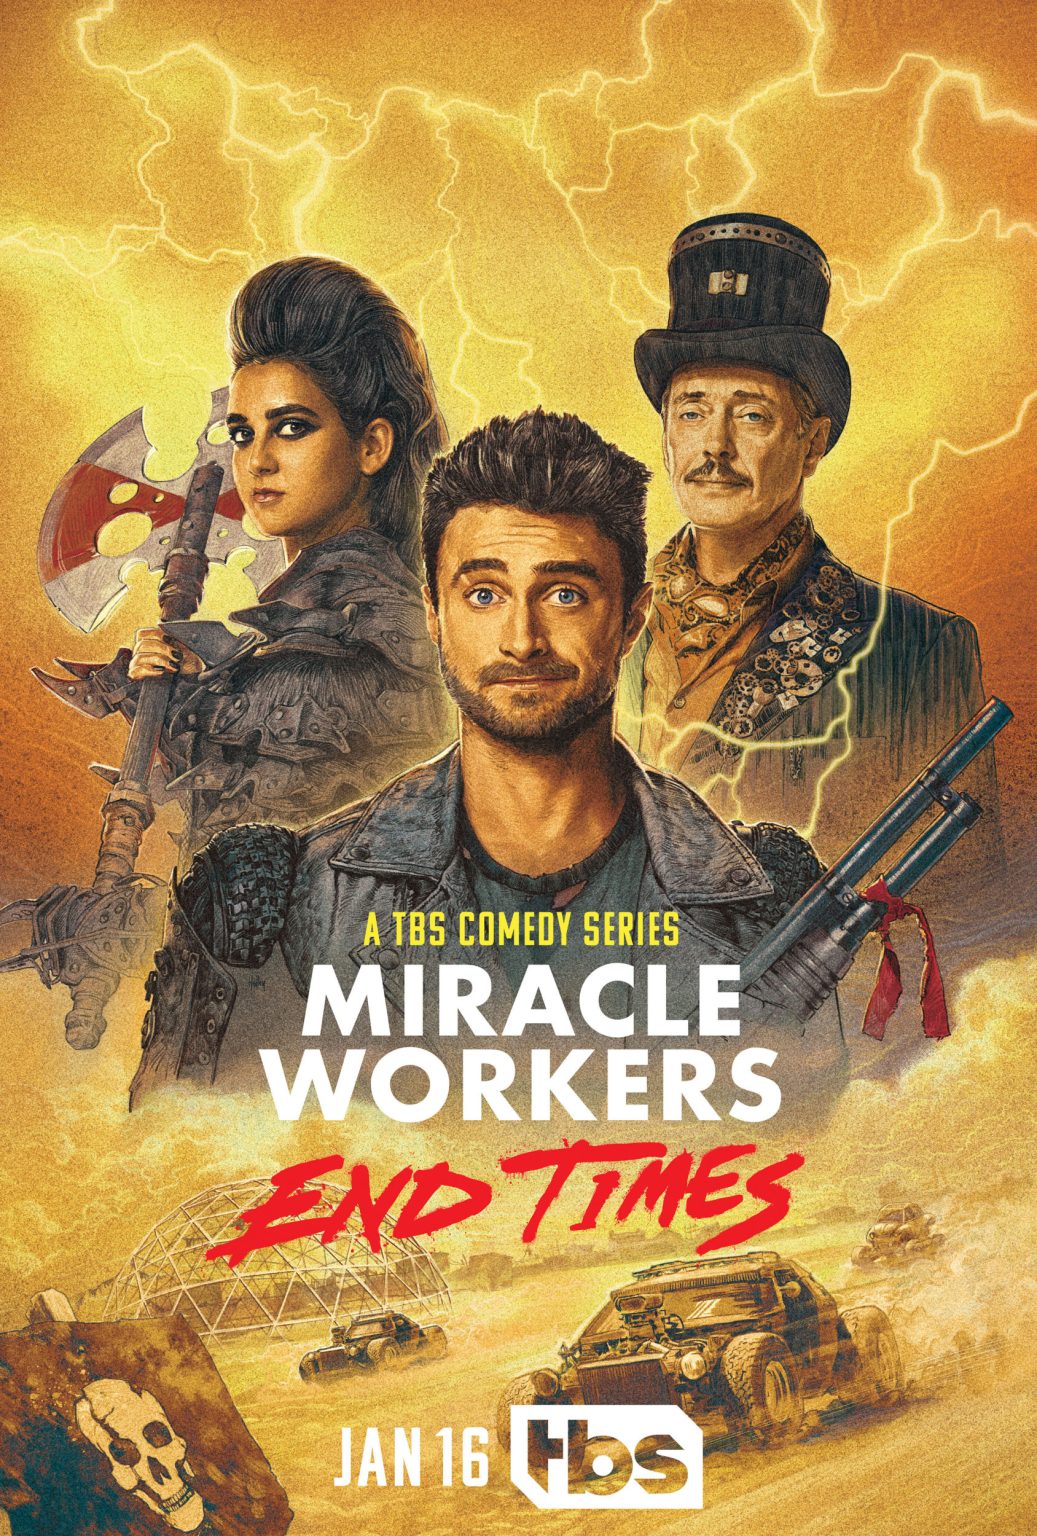 Miracle Workers: in arrivo la quarta stagione “End Times”